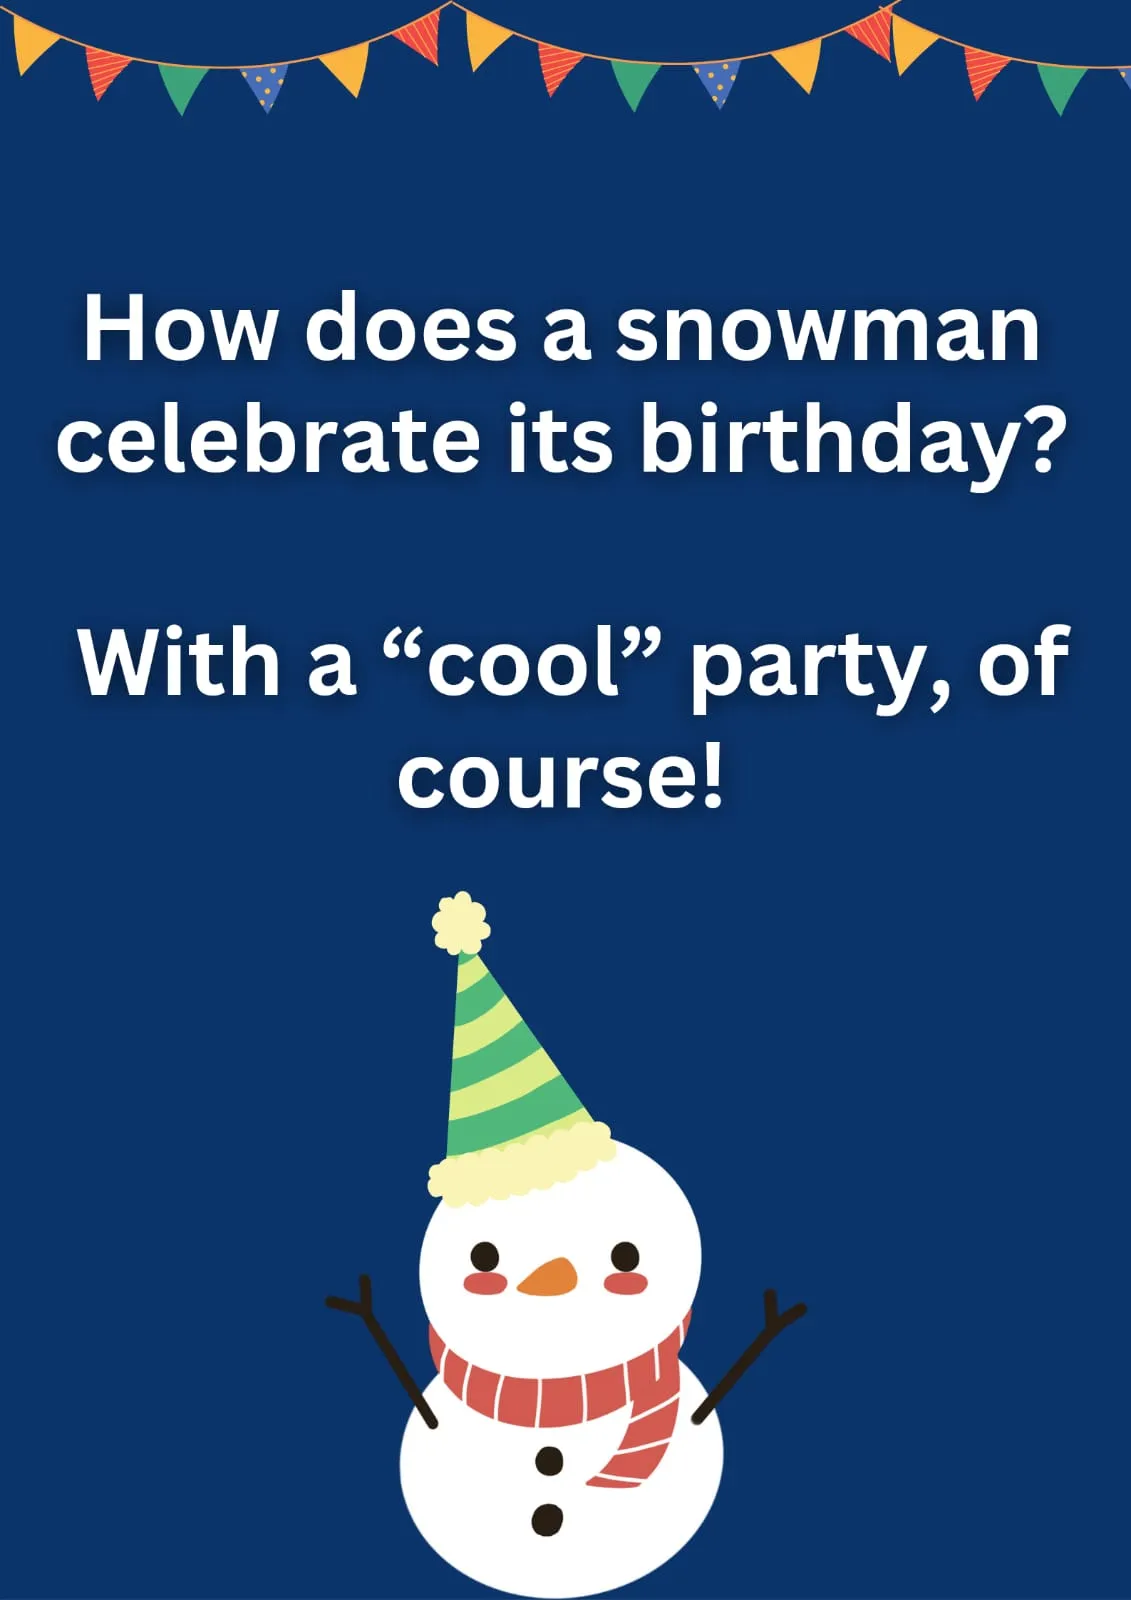 How does a snowman celebrate its birthday?